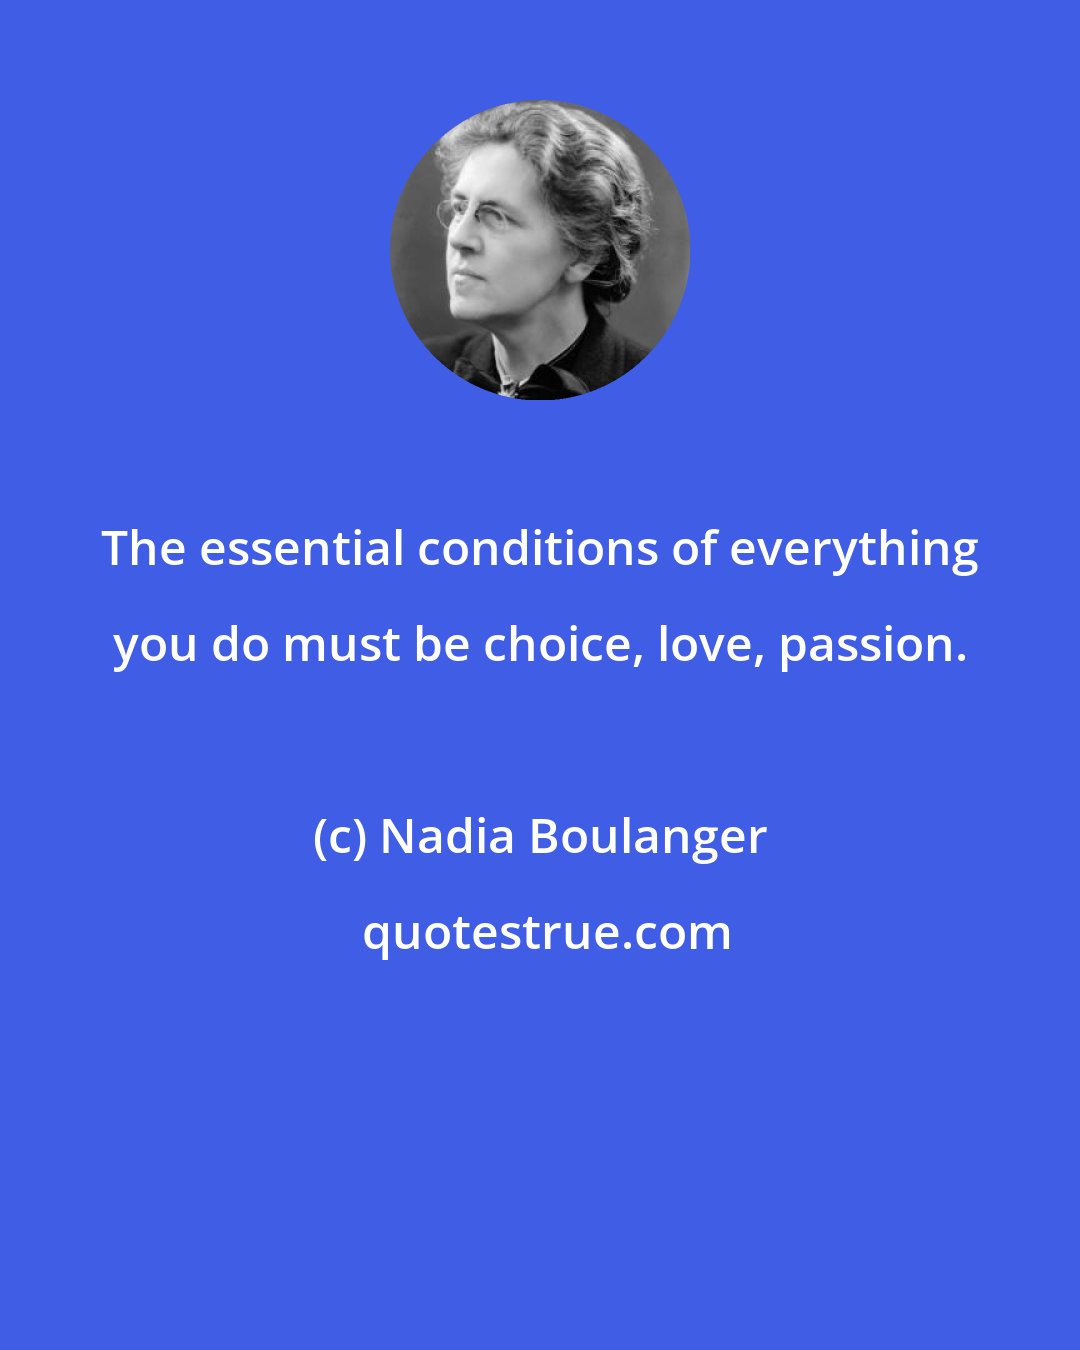 Nadia Boulanger: The essential conditions of everything you do must be choice, love, passion.